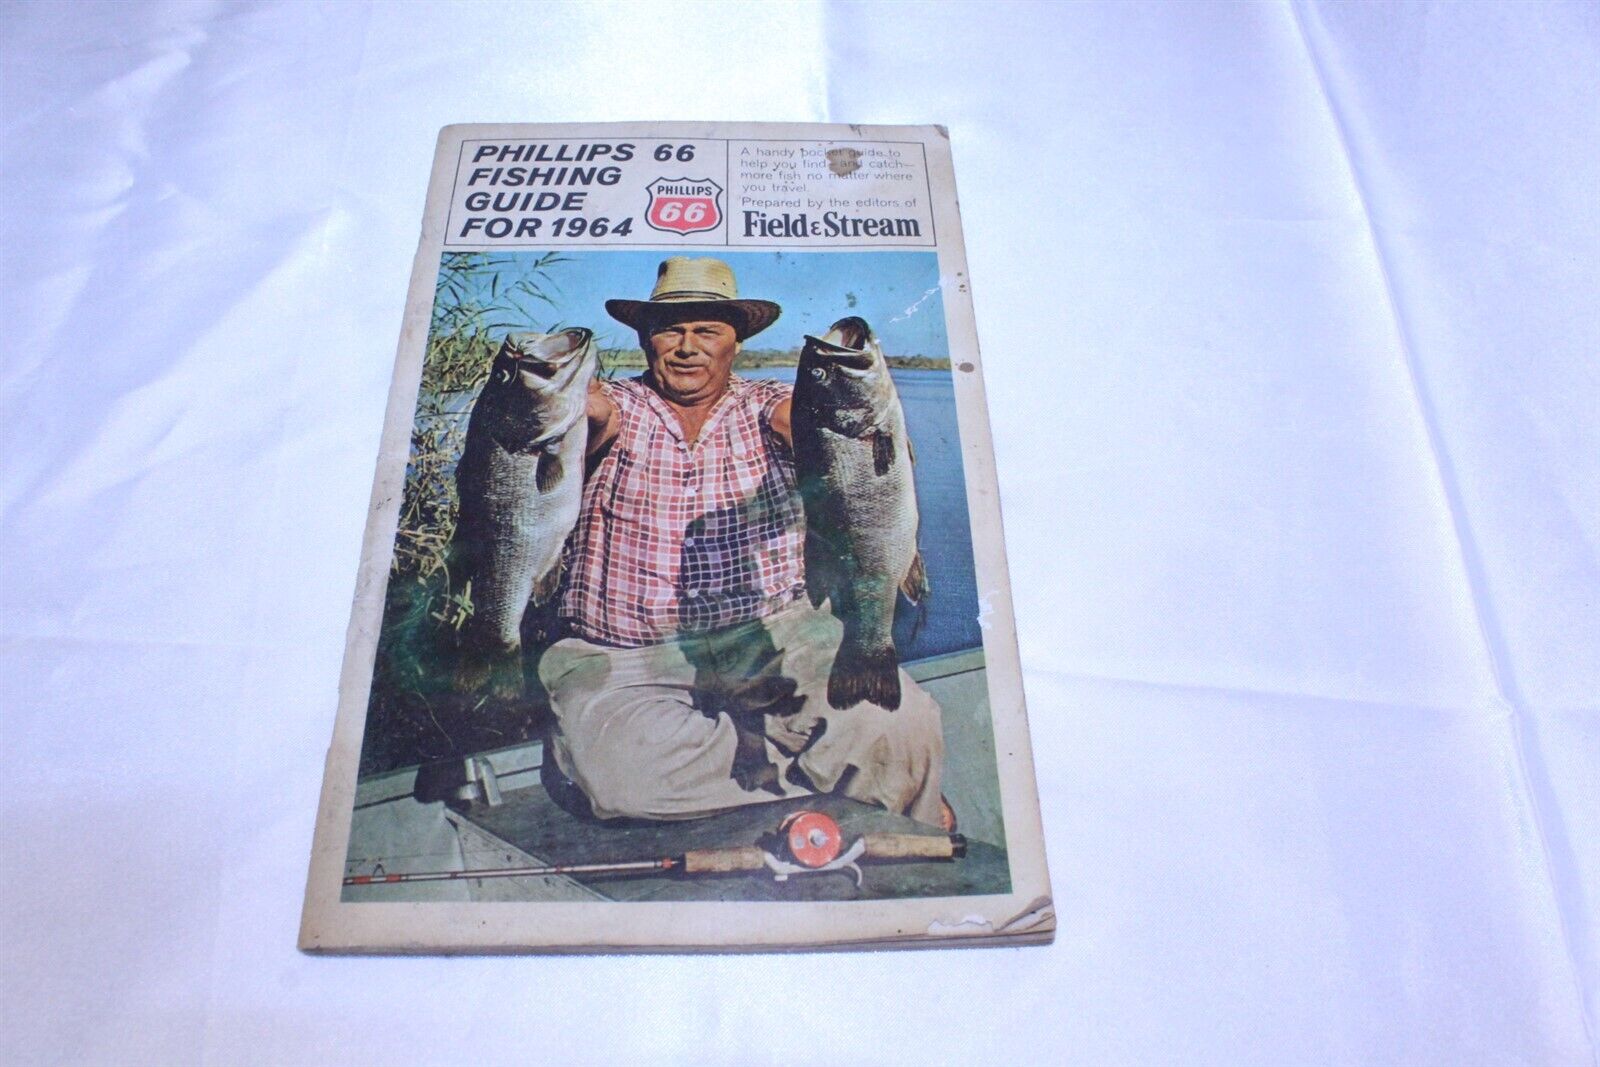  Phillips 66 Fishing Guide For 1964 by Ford + Field & Stream Magazine Vintage